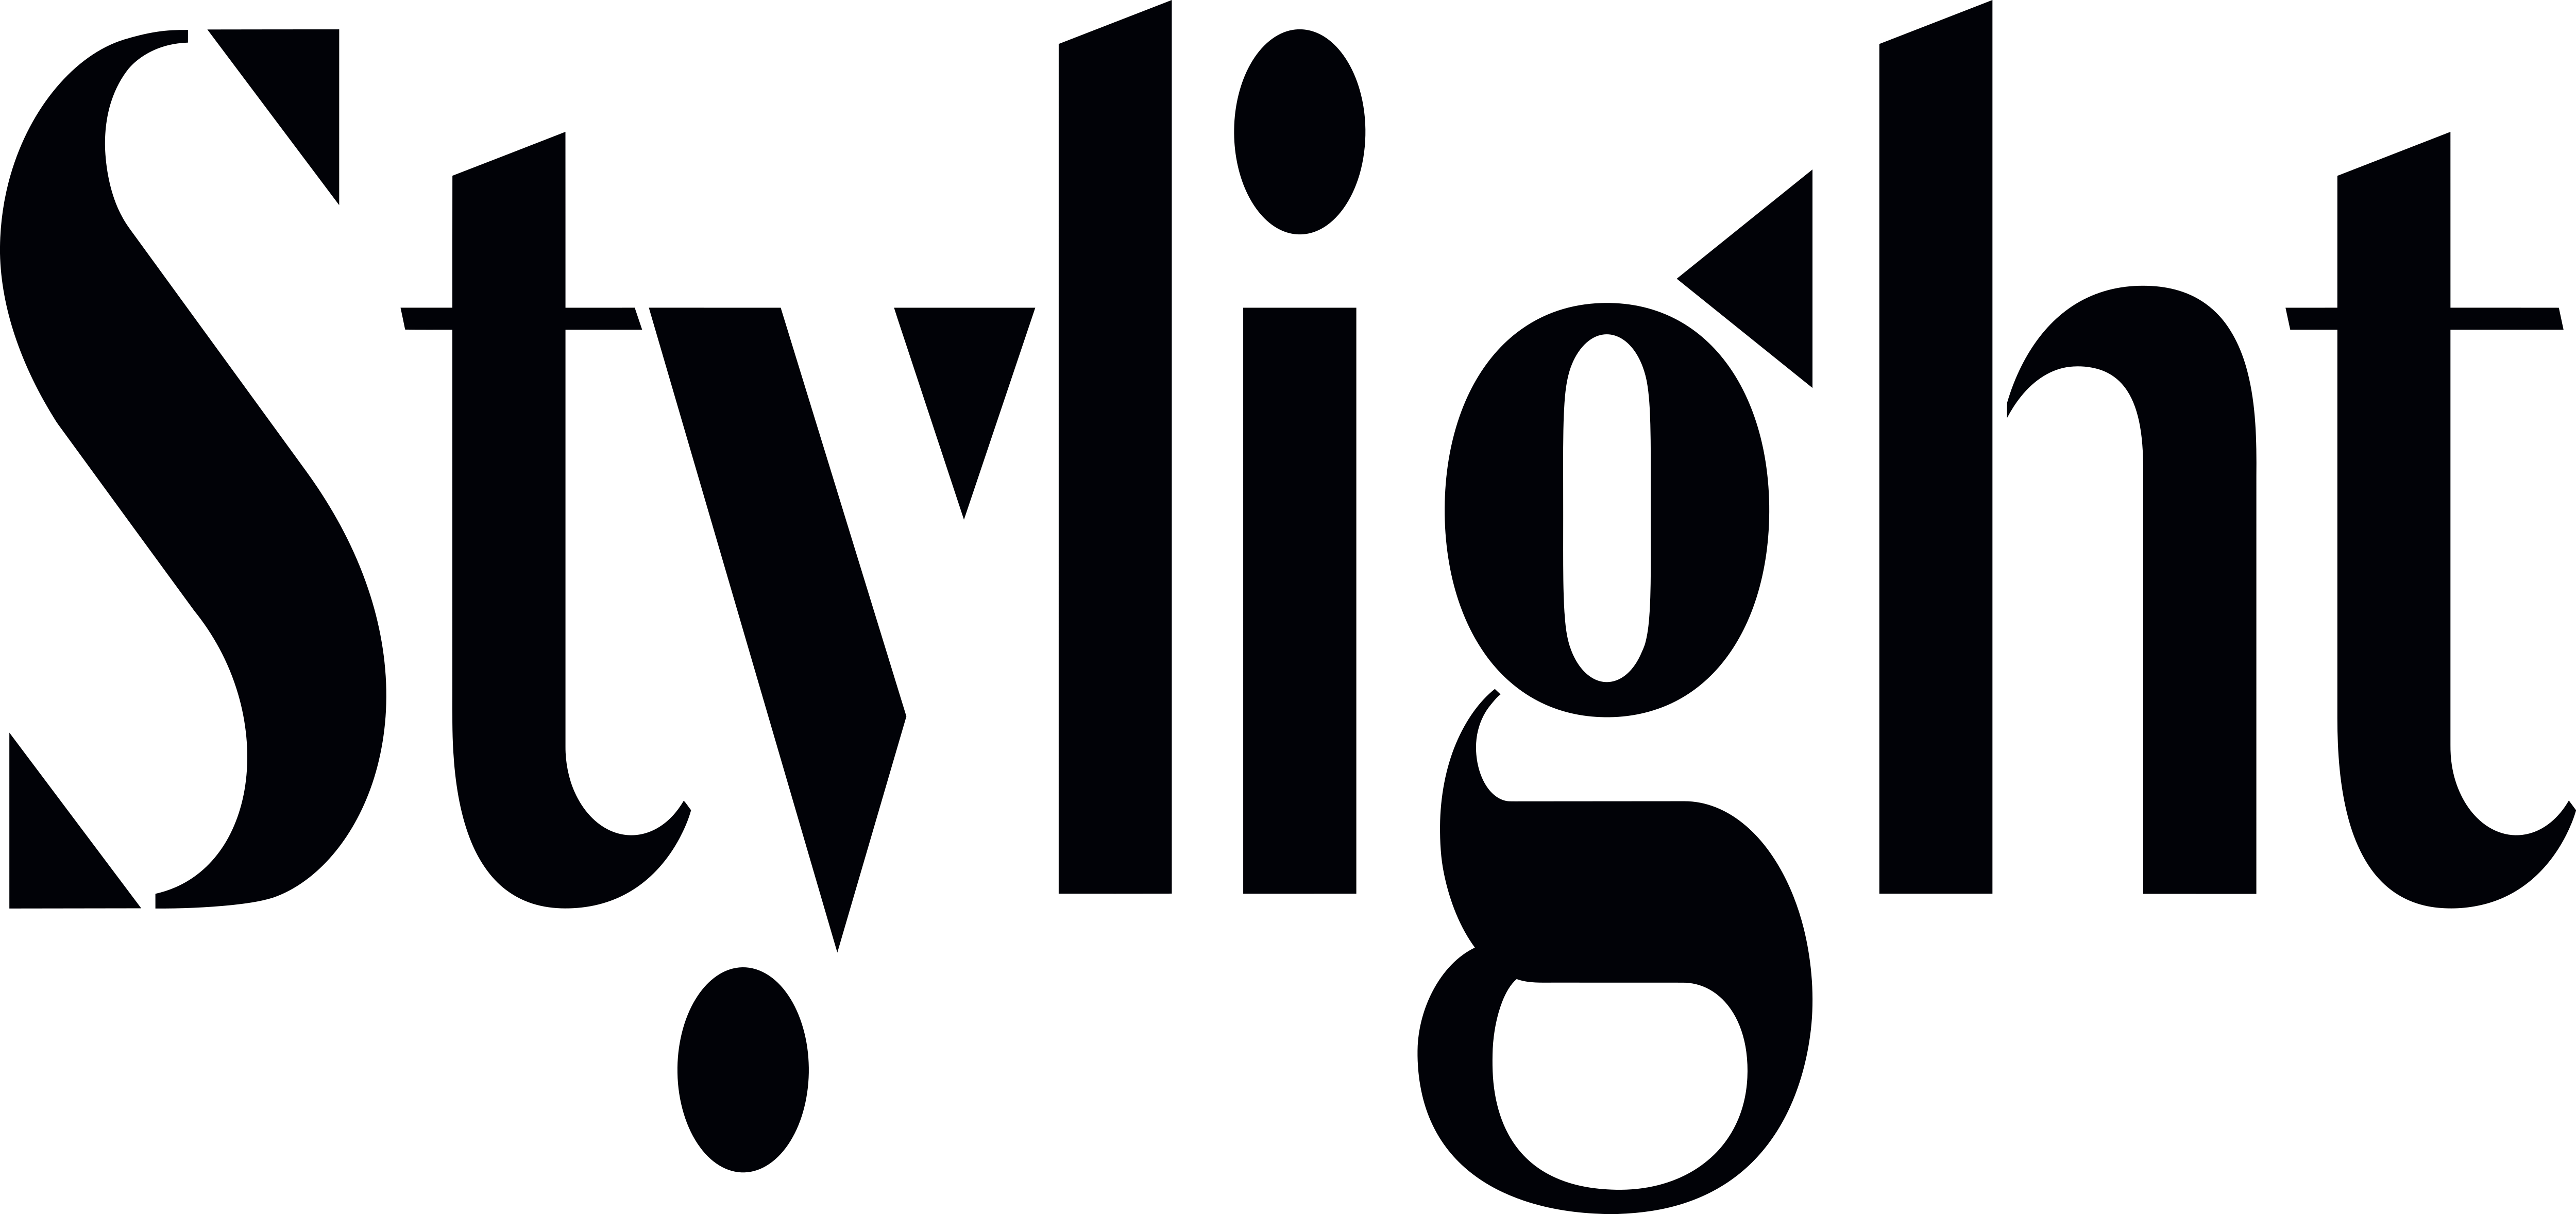 About Stylight - Your search engine for fashion and design